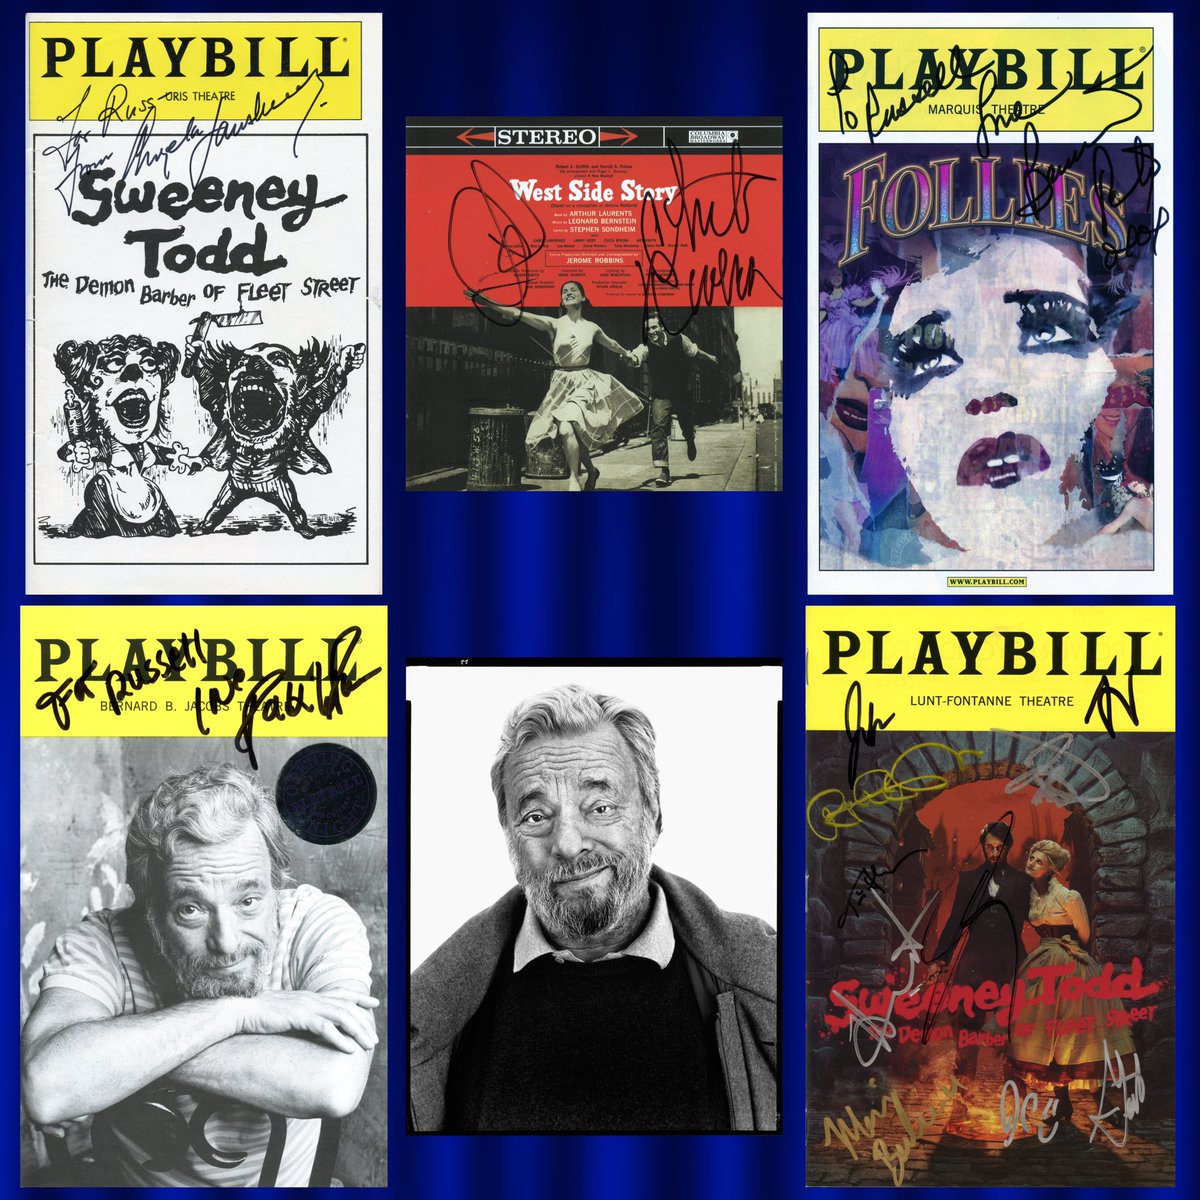 Born March 22, 1930 in New York City, New York - Remembering Broadway legend Stephen Sondheim 🎭 * Chita Rivera signed CD and signed Playbills from Angela Lansbury, Bernadette Peters, Patti LuPone, and the revival cast of “Sweeney Todd” are from my collection. ⭐️ #StephenSondheim